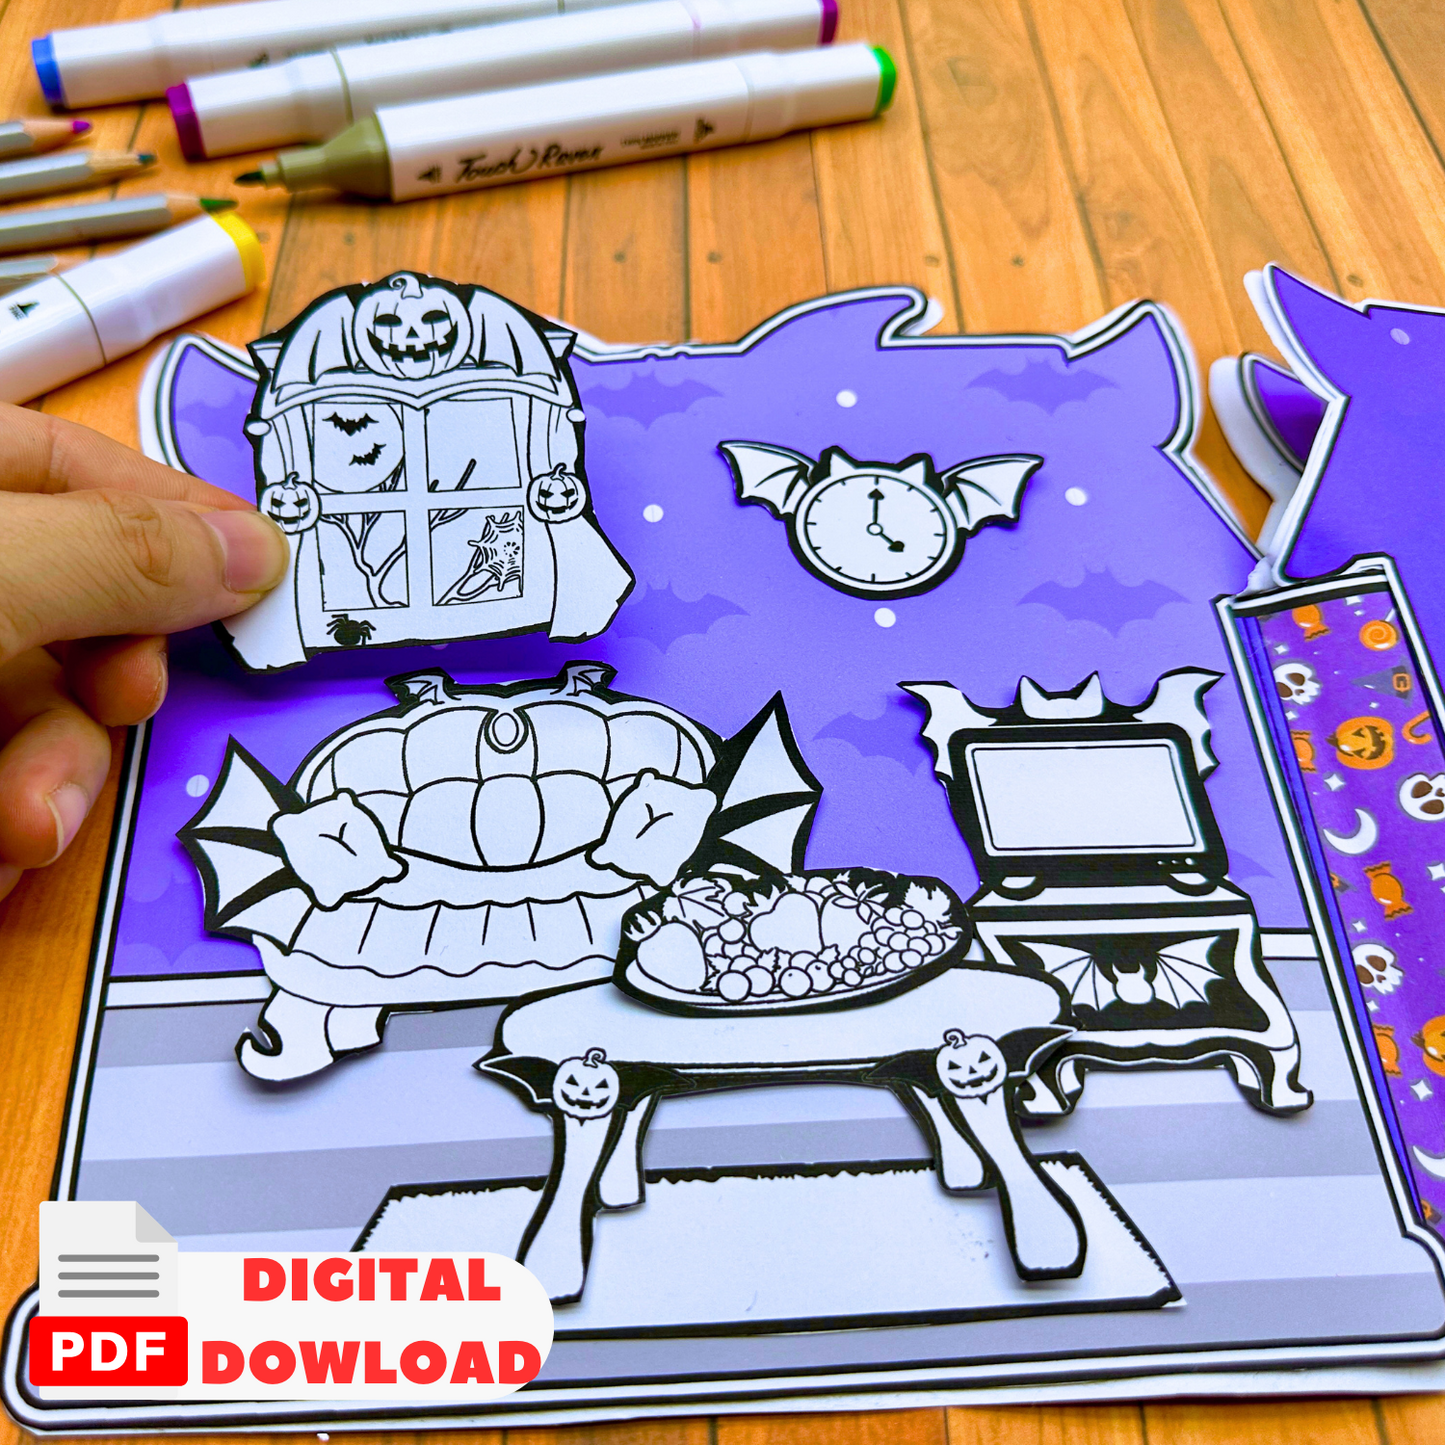 Coloring Halloween Toca house printable 🌈  Printable Toca Boca Witch Paper Doll | Activity for Kids | Quiet book pages 🌈 Woa Doll Crafts